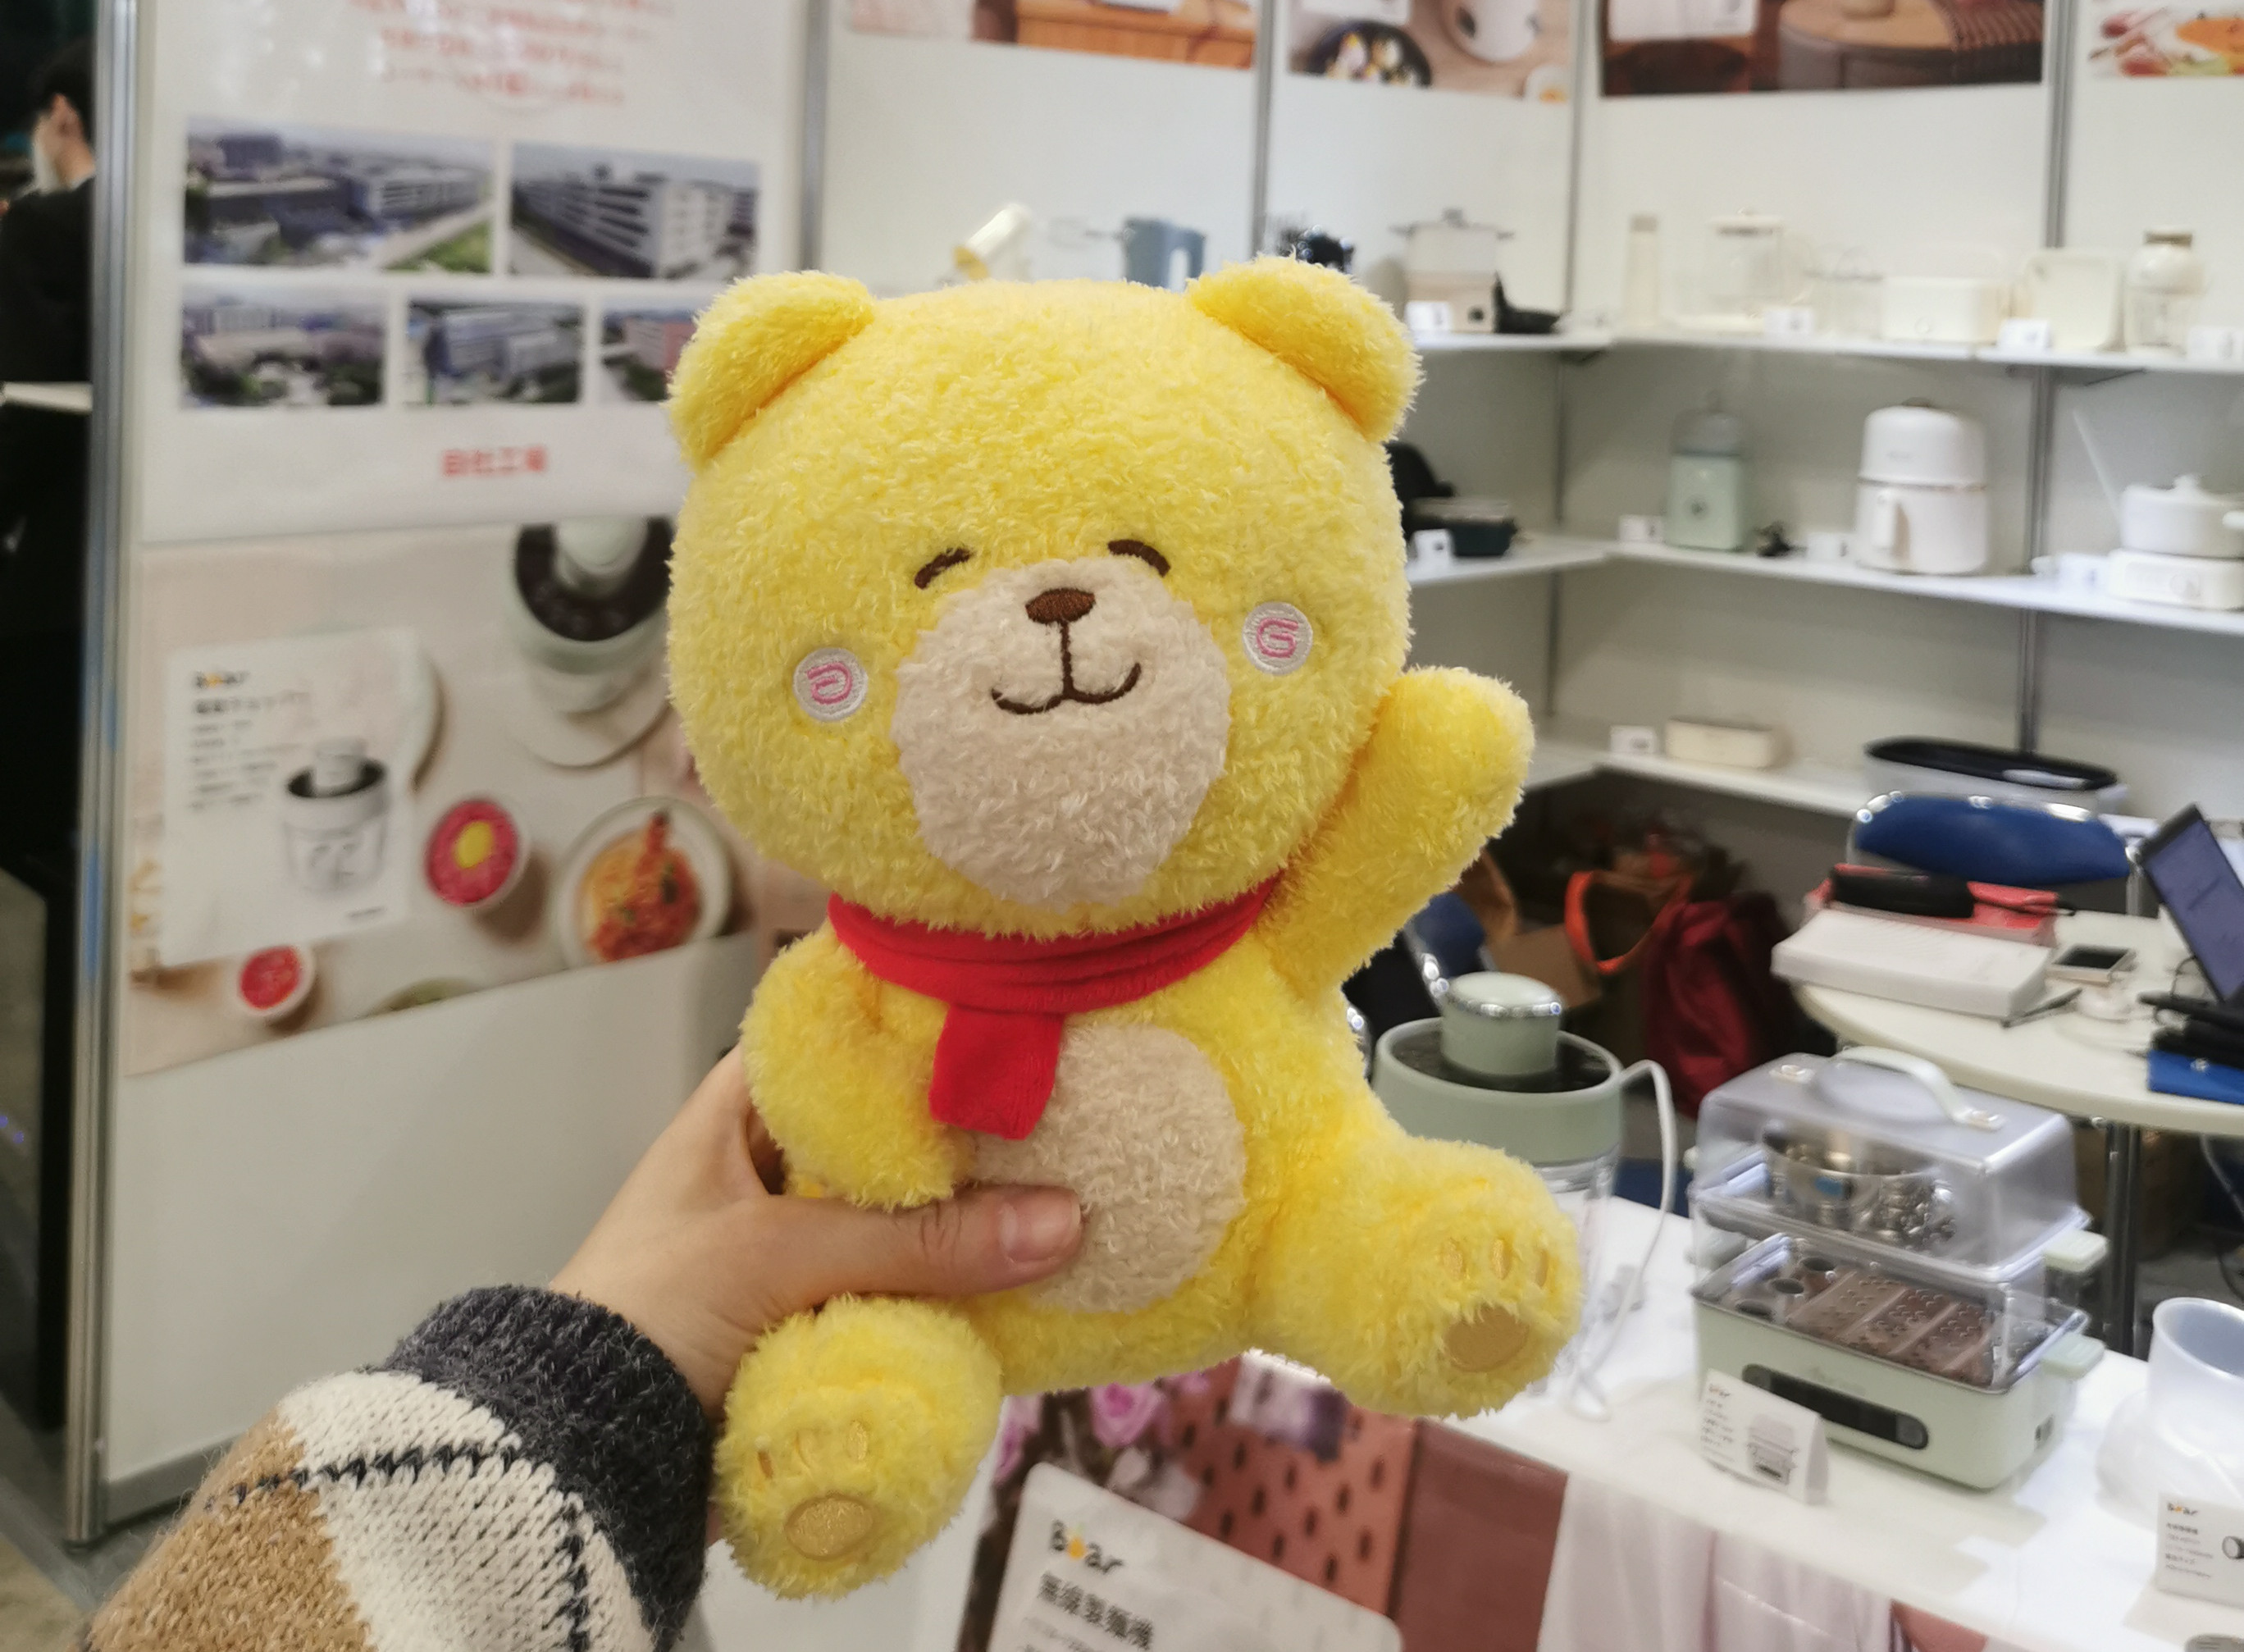 Bear attended The 95th Tokyo International Gift Show